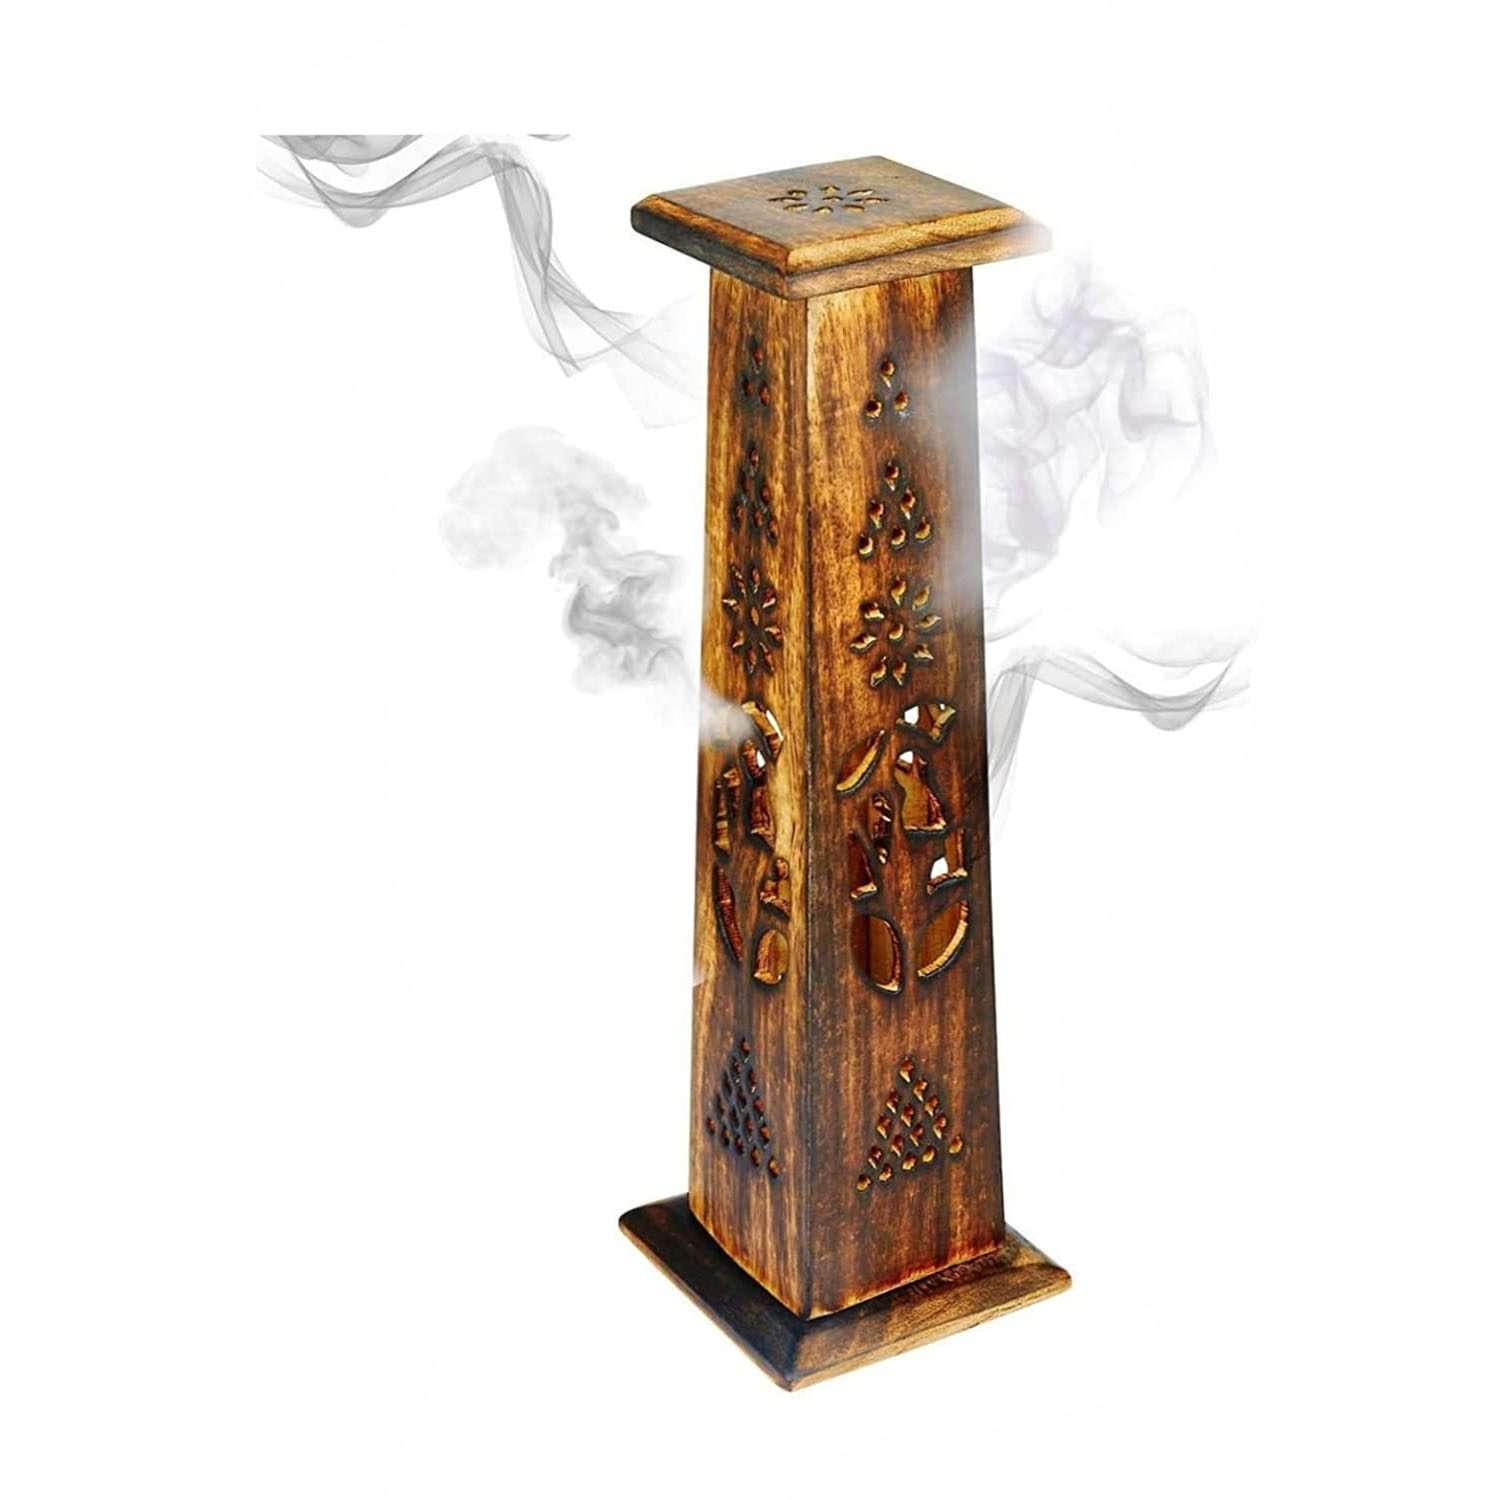 Handcrafted Carving Sheesham Wood/Square Tower Shaped Incense Stick Holder